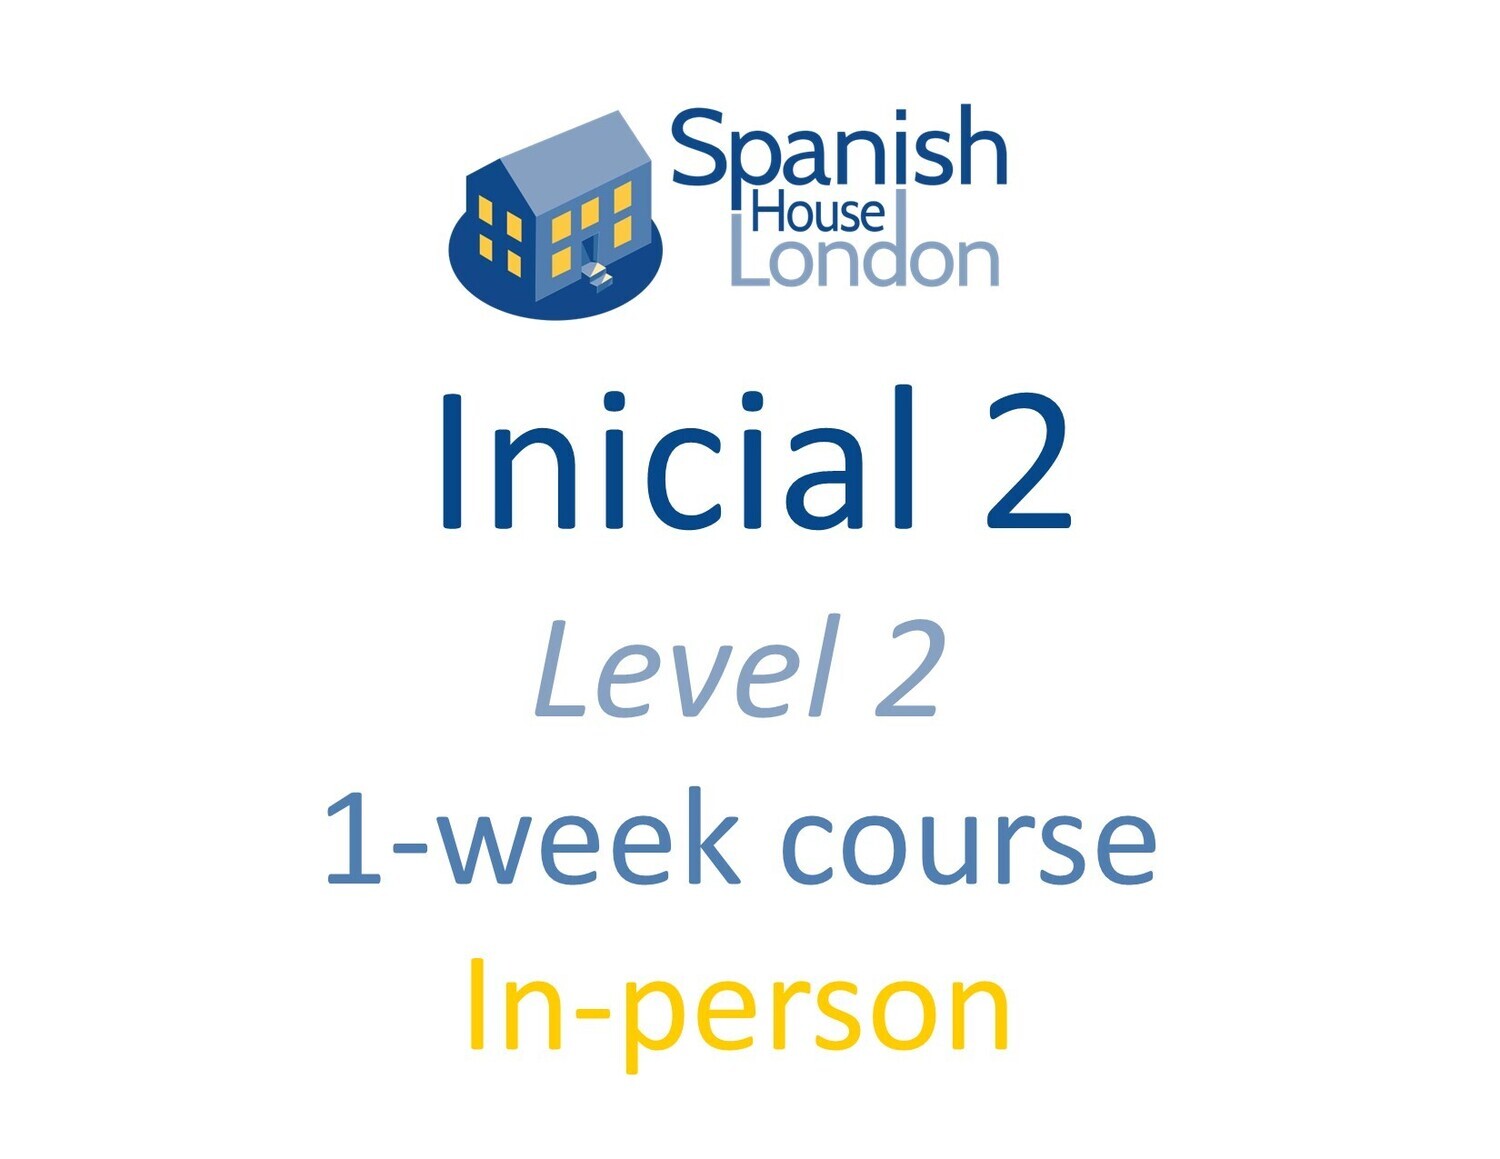 One-Week Intensive Inicial 2 Course starting on 31st January at 10am in Clapham North